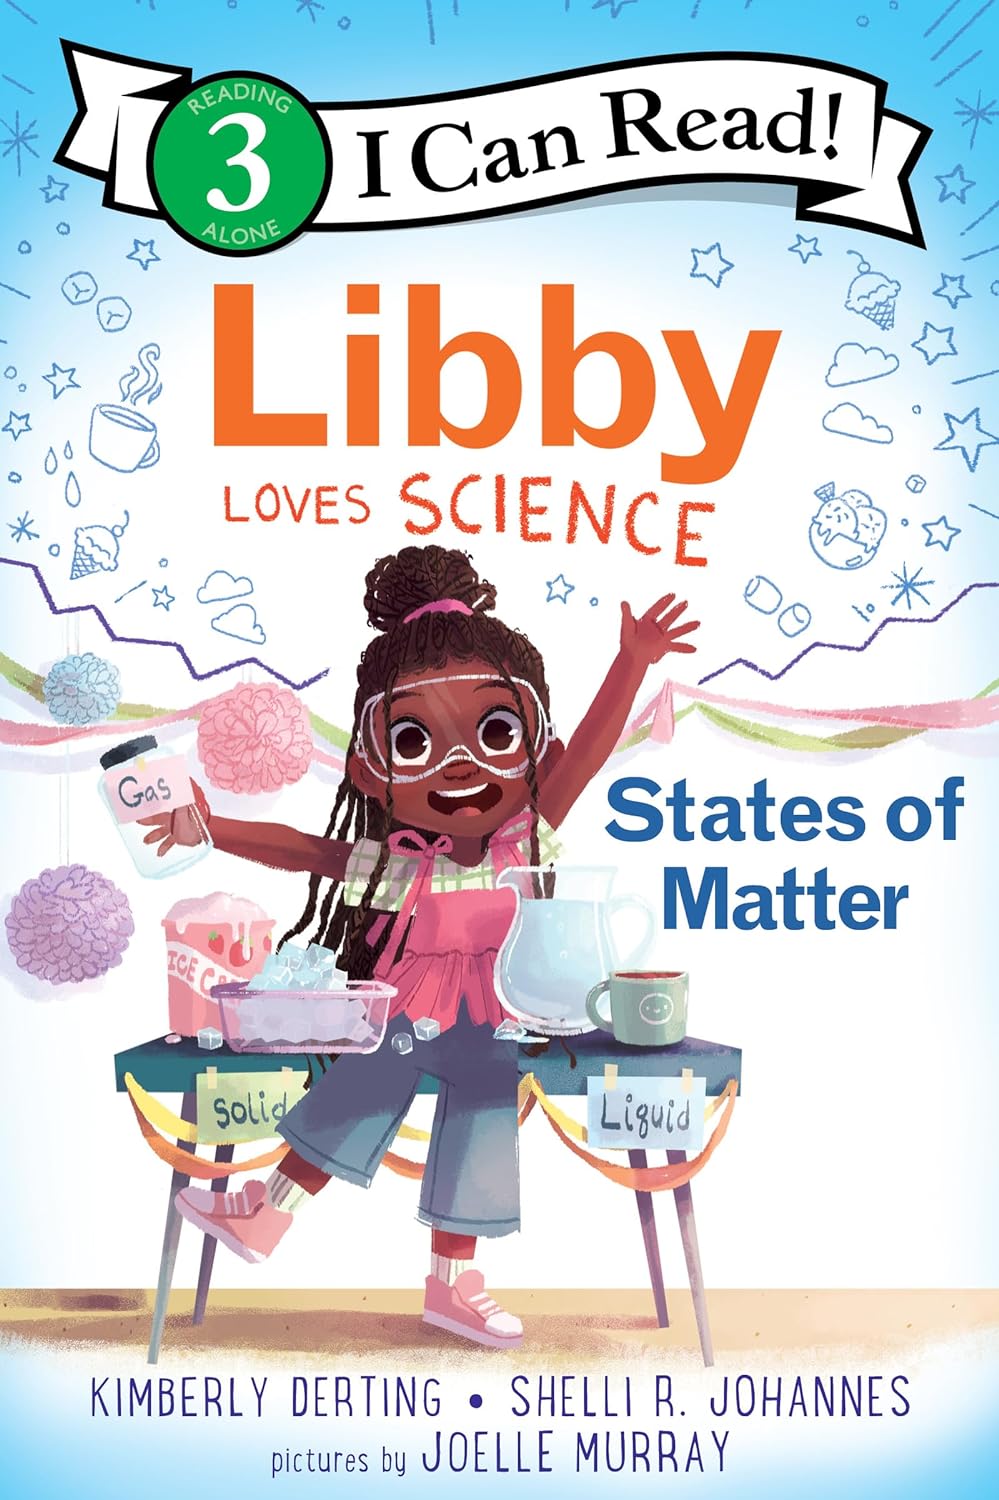 Libby Loves Science, by Kimberly Derting and Shelli R. Johannes, illustrated by Joelle Murray